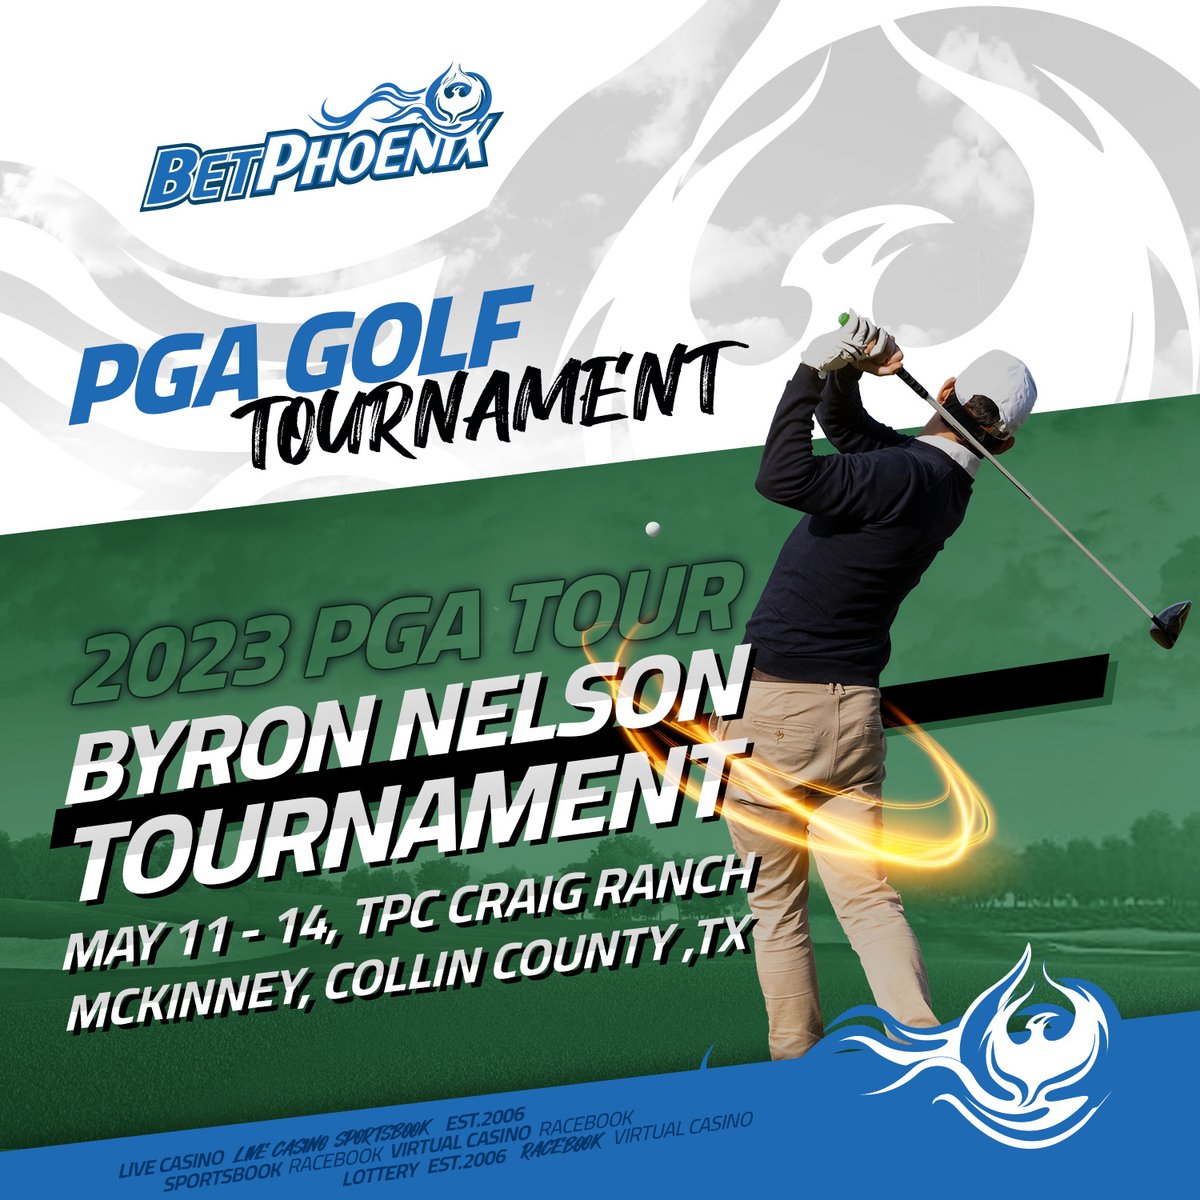 The #PGATour goes to Dallas, TX🤠🔥
💵Join #BetPhoenix & Get $100, Check📌

⛳️The #PGA #ATTByronNelson
🏌️‍♂️Daily Action with Matchups

#TPCCraigRanch hosts this event in honor of one of the greatest golfers of all time🏆

#Golf #ByronNelson #GolfTalk #SportsBetting #BettingTwitter